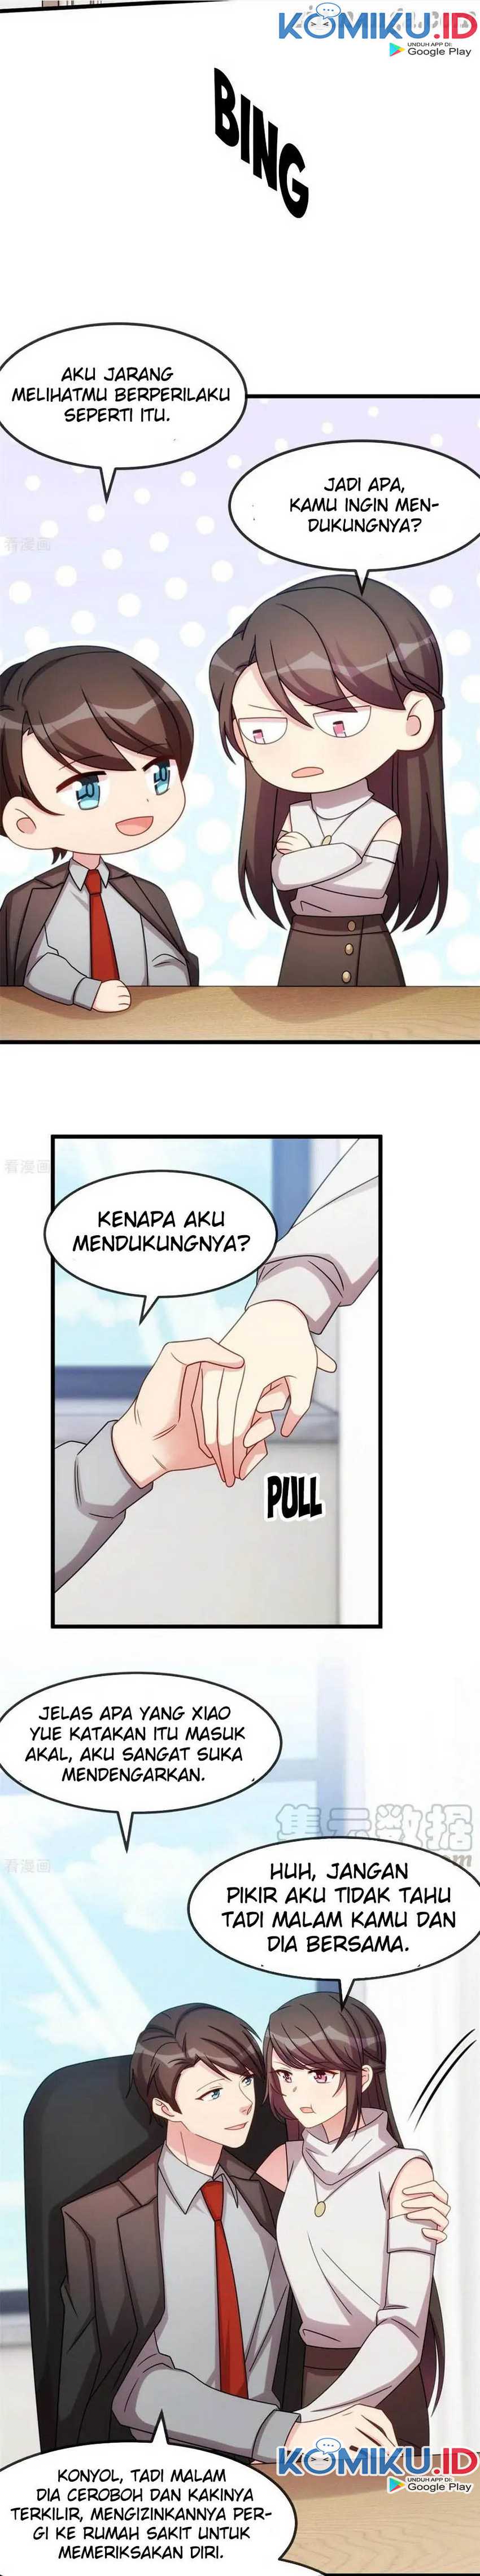 CEO’s Sudden Proposal Chapter 269